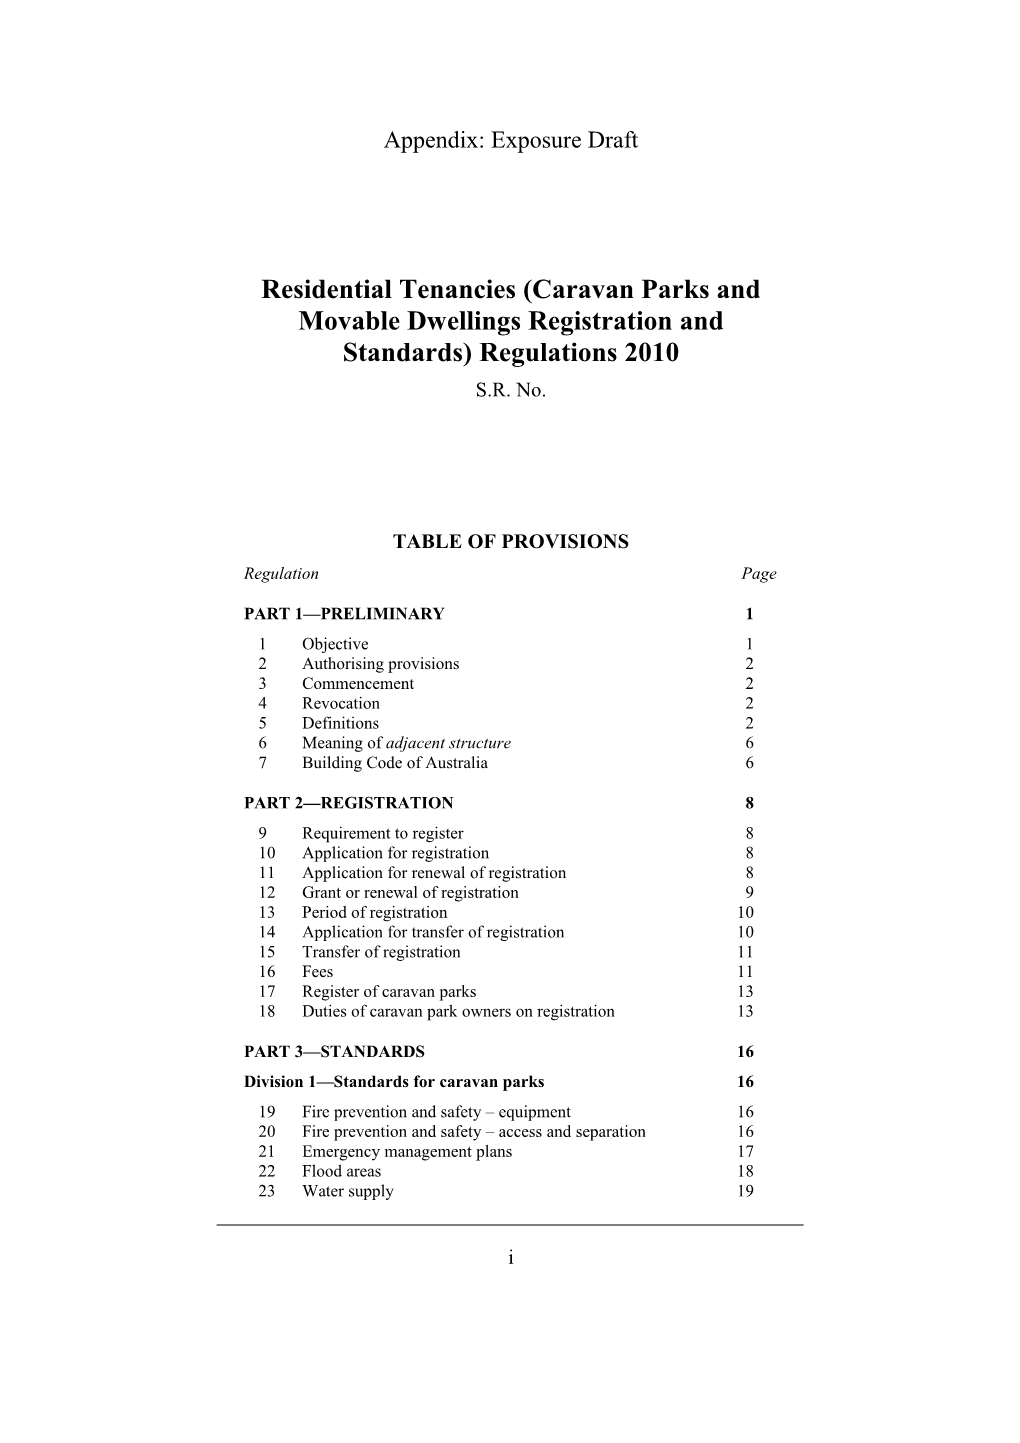 Residential Tenancies (Caravan Parks and Movable Dwellings Registration and Standards)